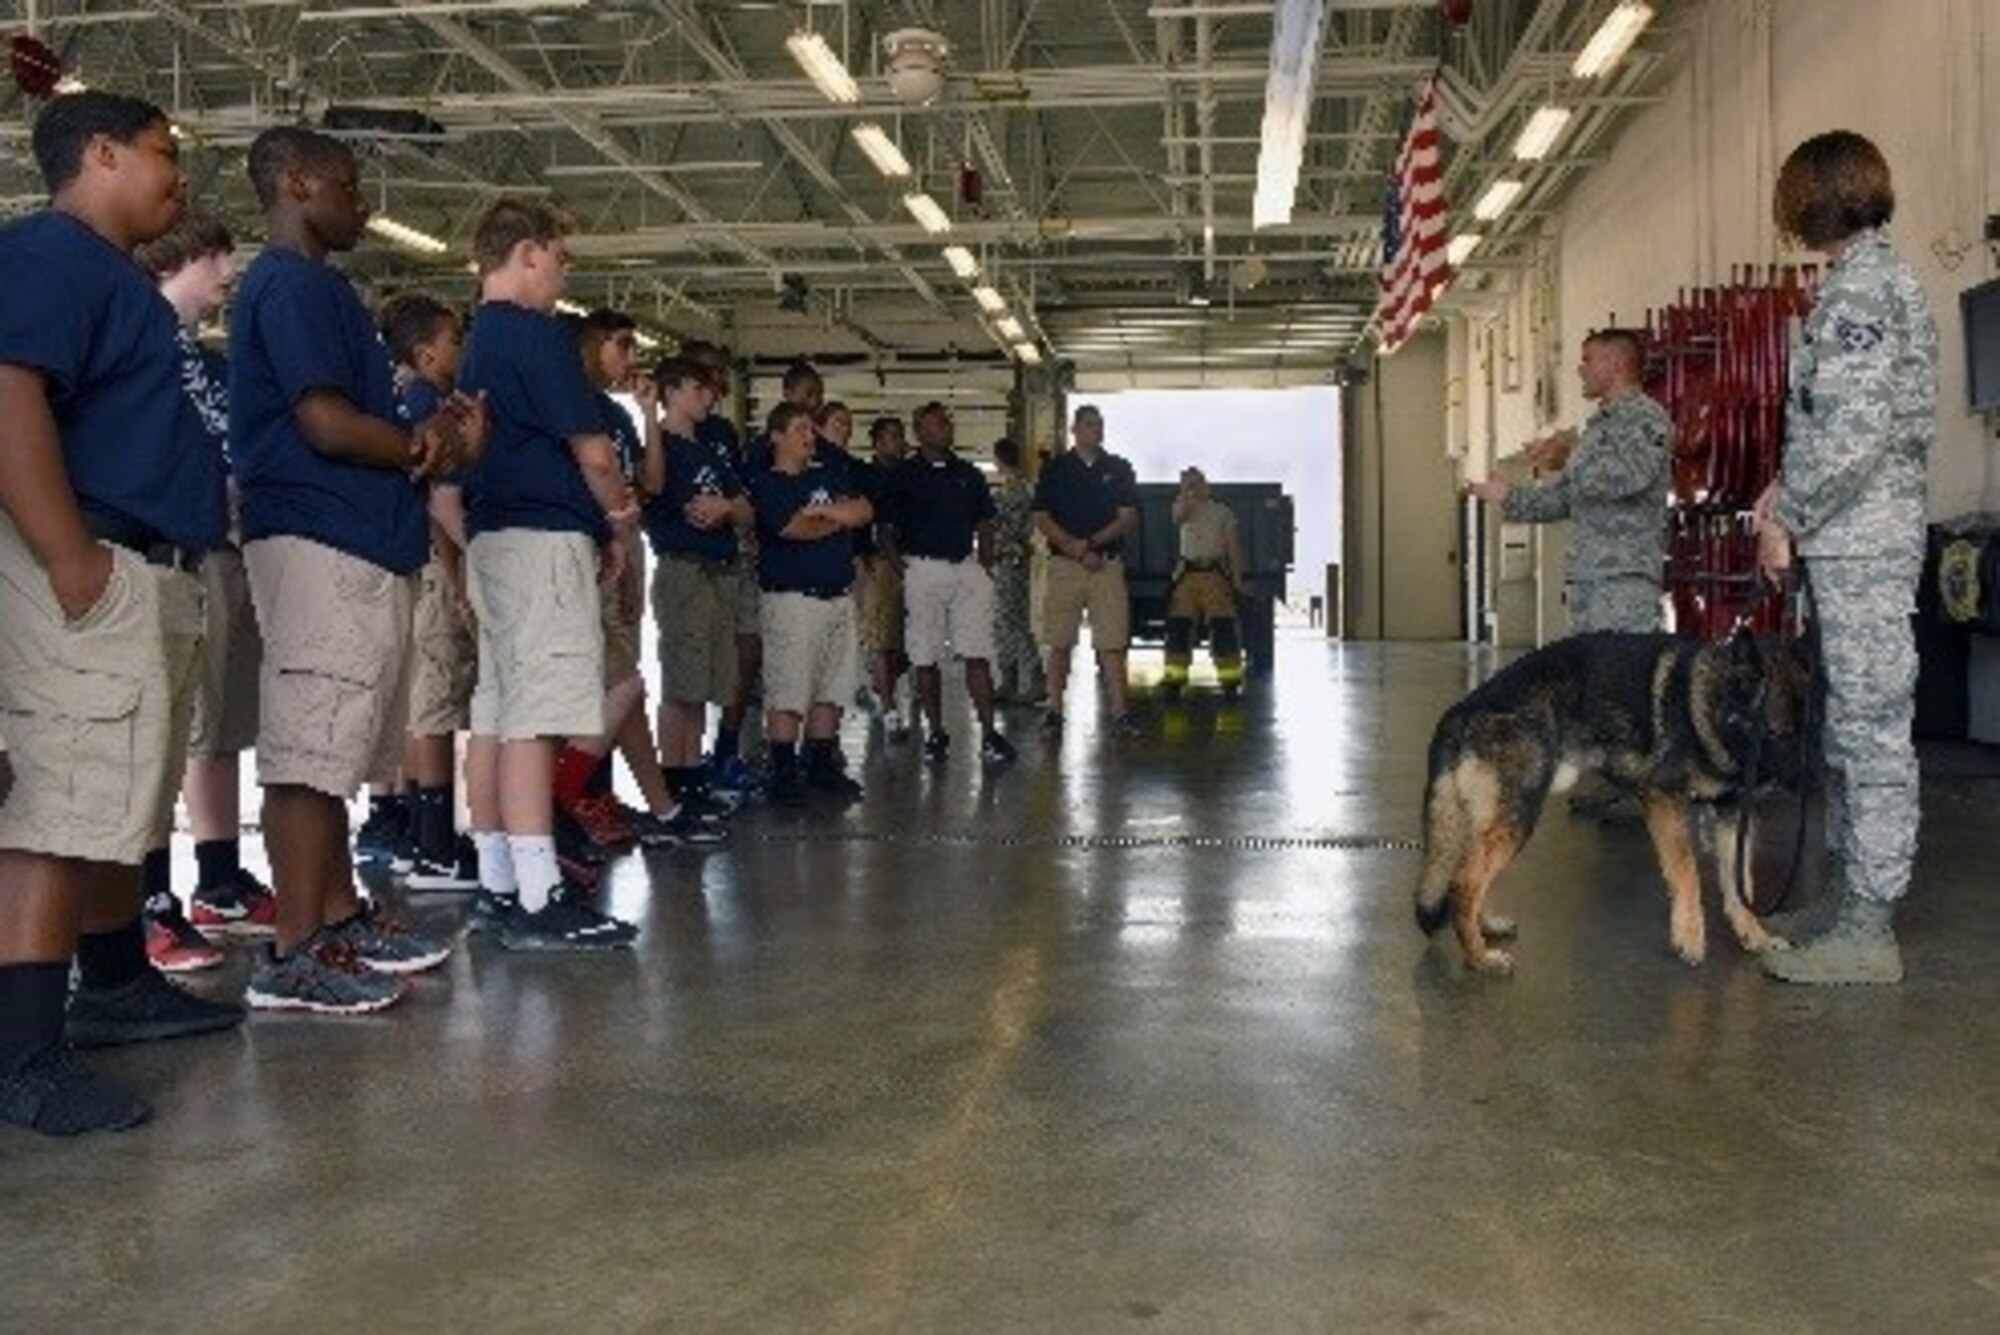 Staff Sgt. Nicole Gilley (far right), 4th Security Forces Squadron military working dog trainer, and Staff Sgt. John Makripodis, 4th SFS kennel master, demonstrate basic dog commands to Camp Confidence students during a base tour, June 27, 2016, at Seymour Johnson Air Force Base, North Carolina. The Camp Confidence program allows students to tour various careers around the state as well as military installations. (U.S. Air Force photo/Airman 1st Class Ashley Williamson)